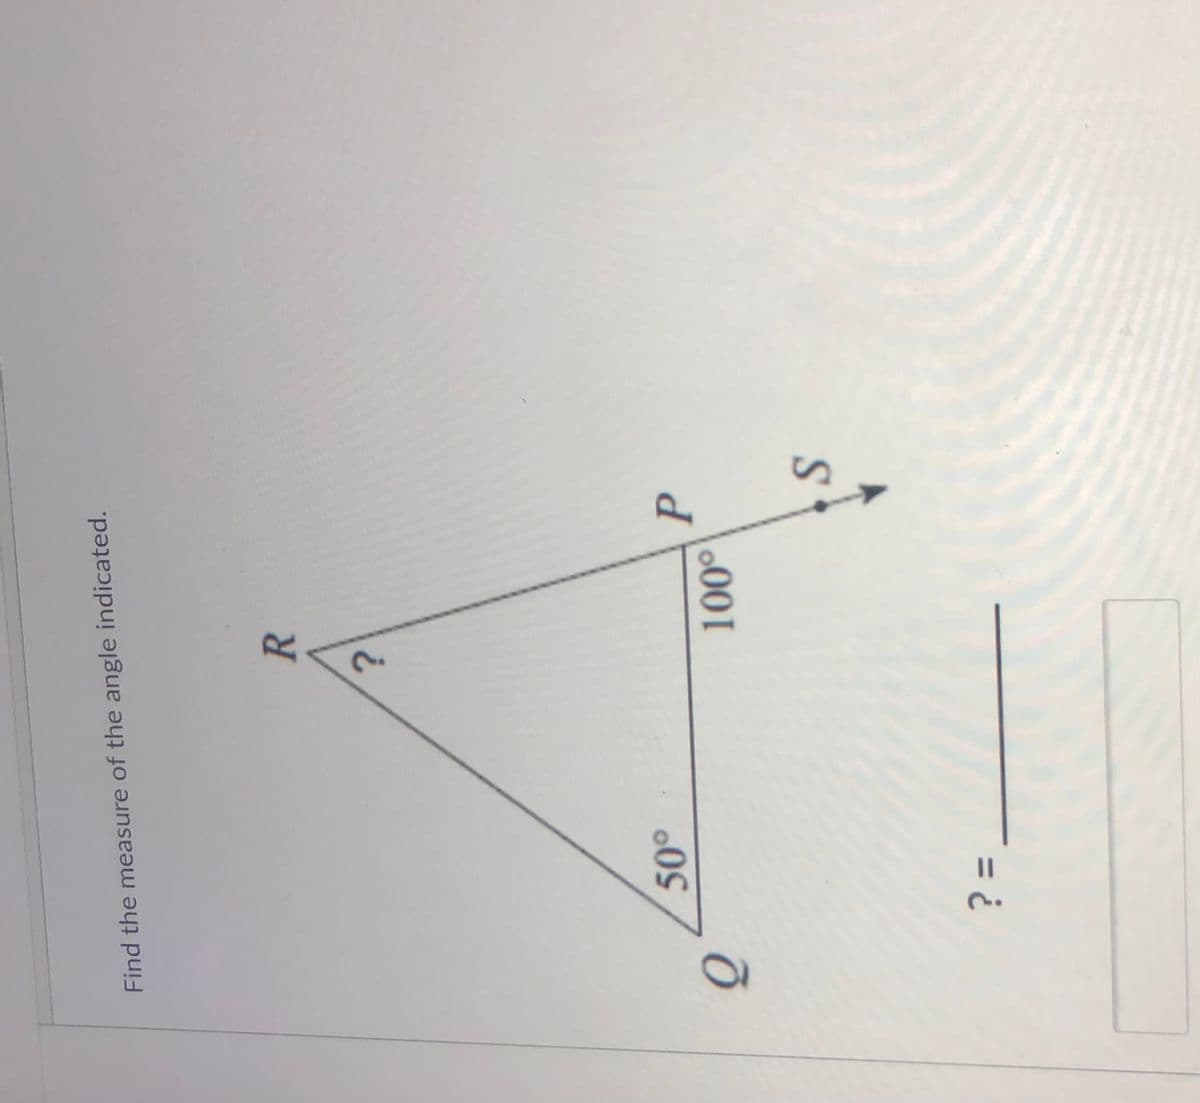 Find the measure of the angle indicated.
P
000
= ¿
